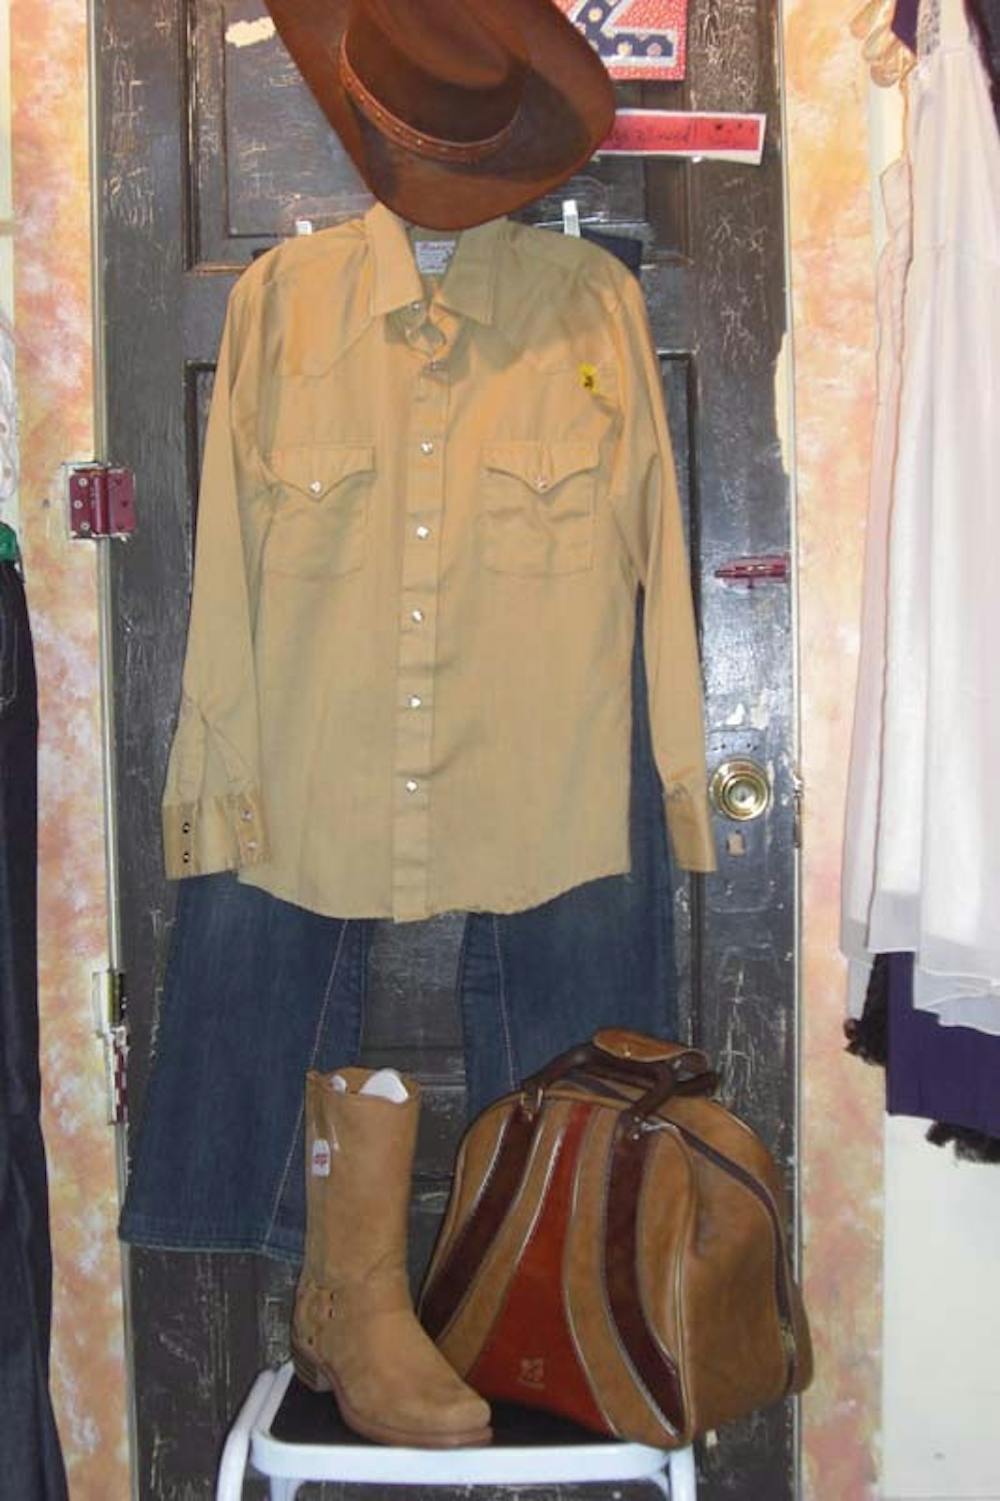 Cactus Flower, 322 E. KIrkwood Ave.
• Western-style beige button-up T-shirt $16
• Cowboy hat $30
• Detailed medium-wash jeans $12
• Leather bag $20
TOTAL: $78